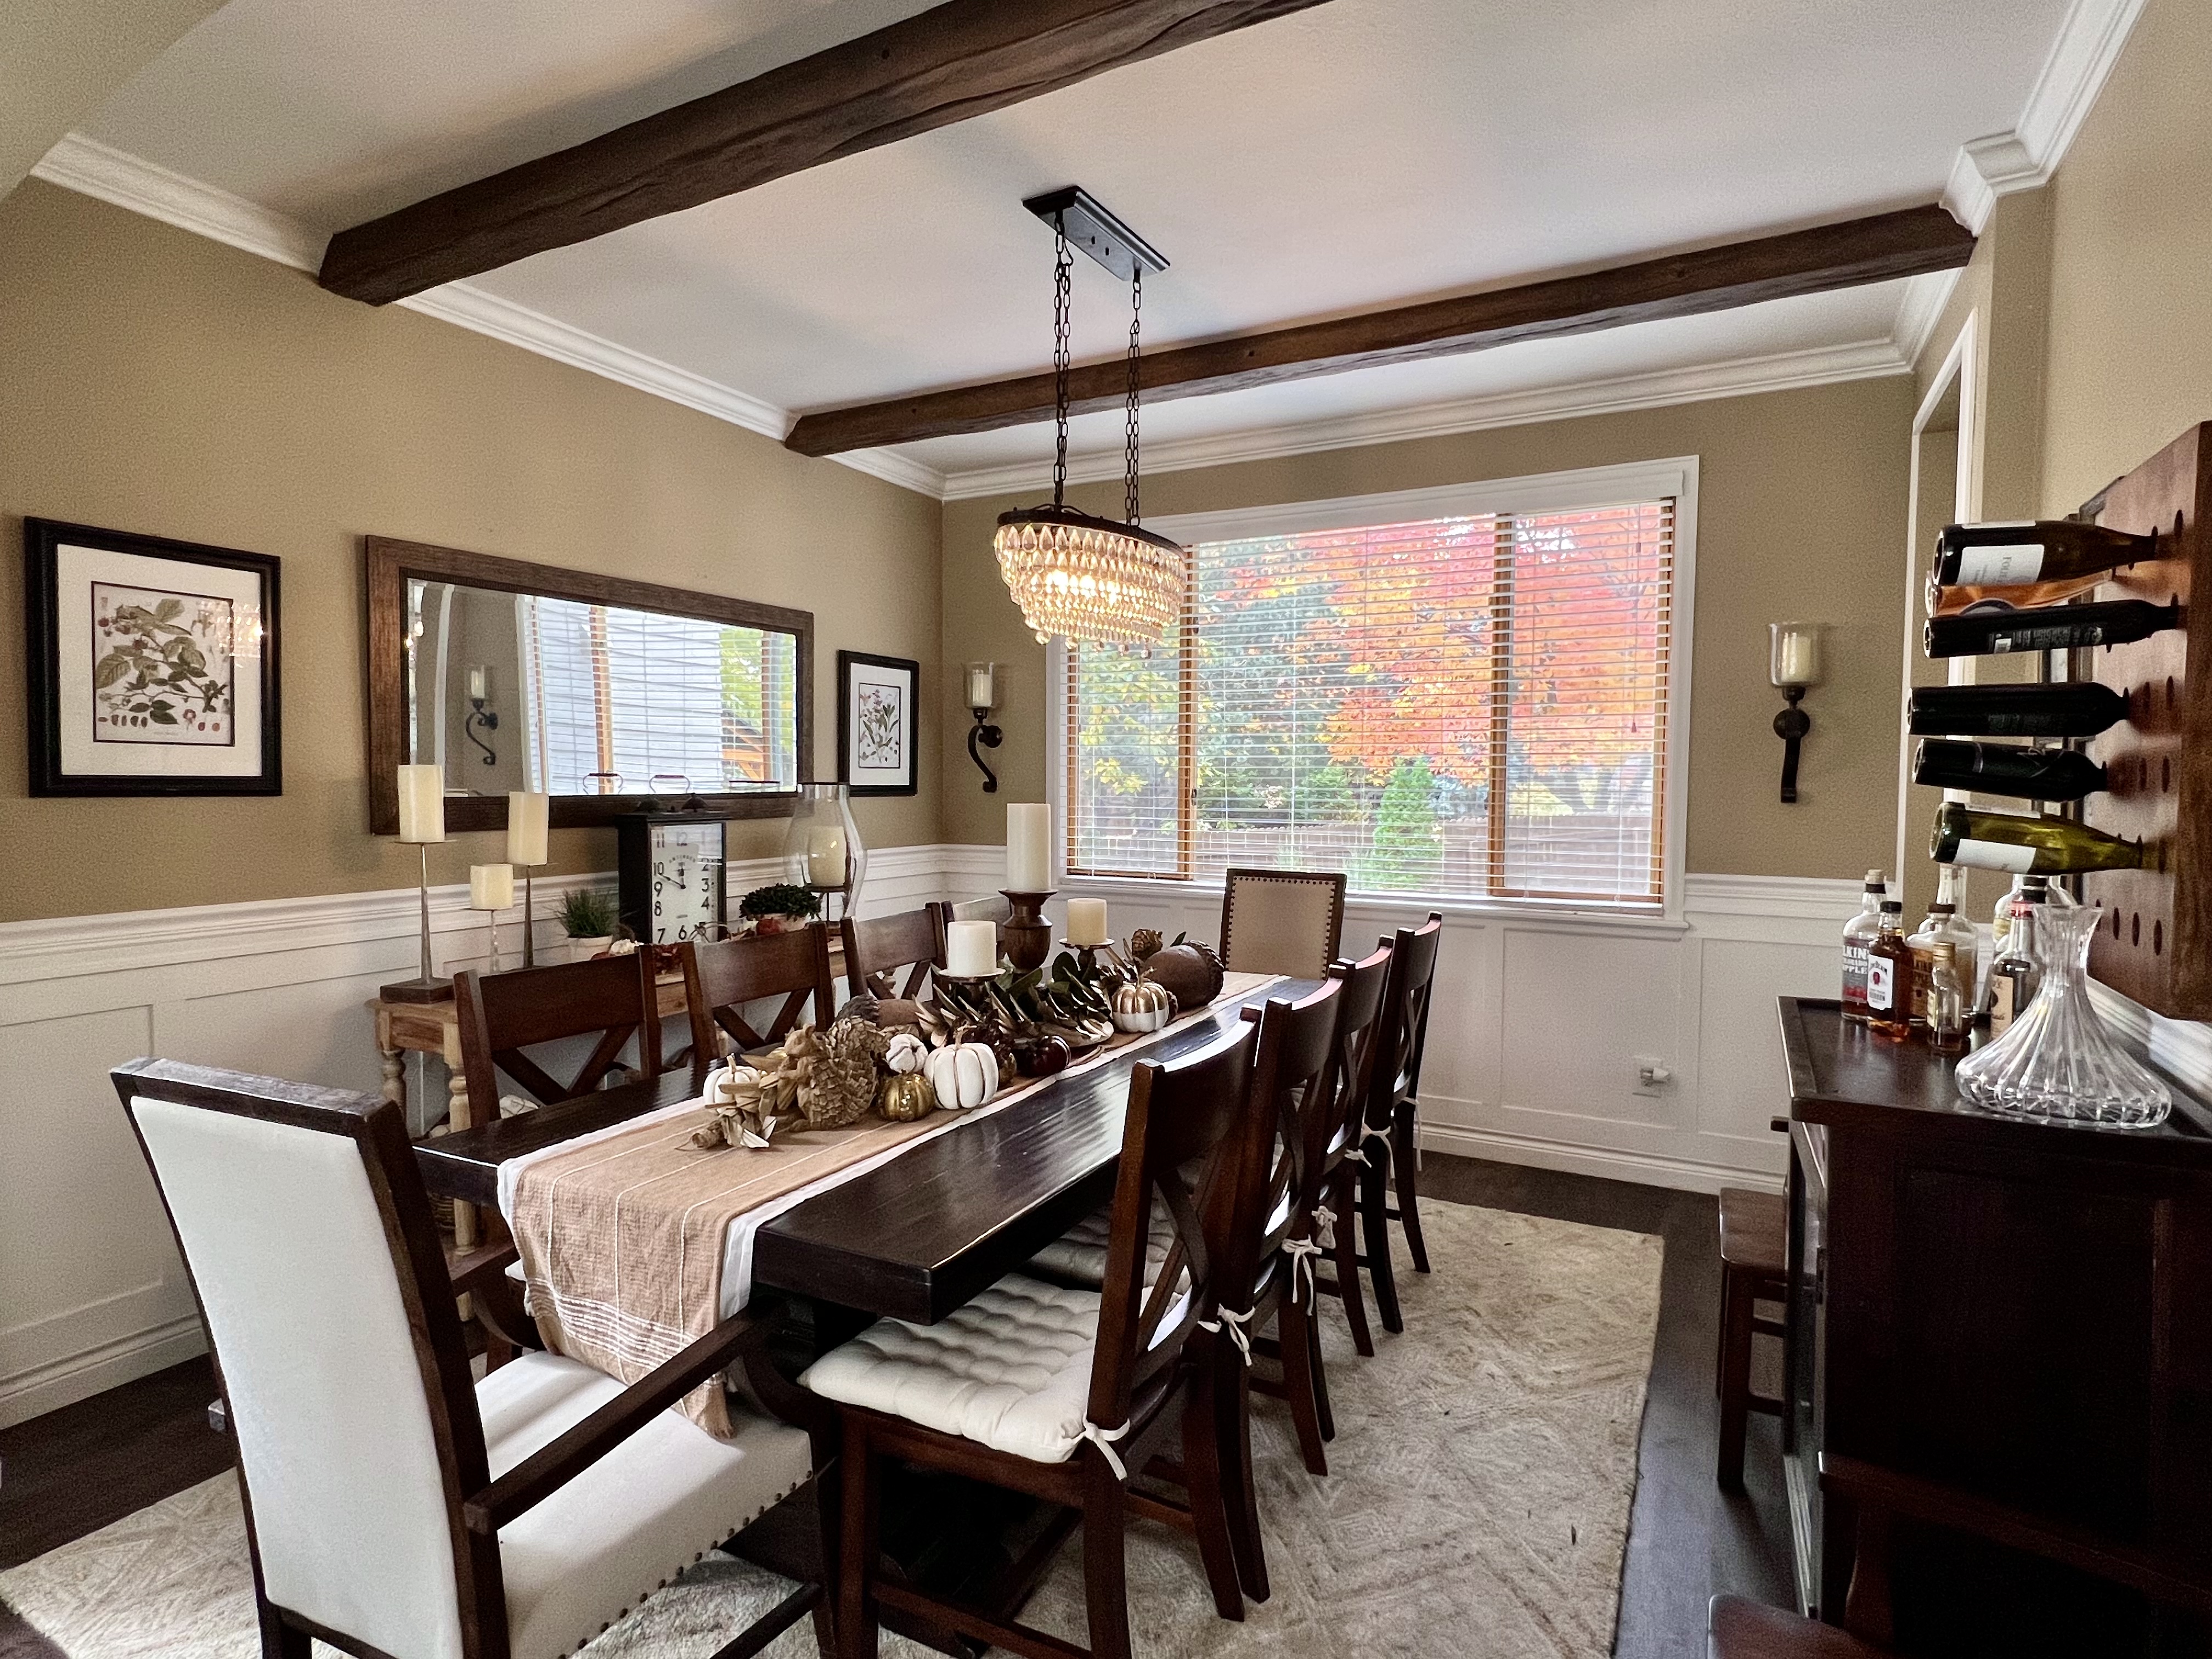 Dining Room With Faux Wood Beams